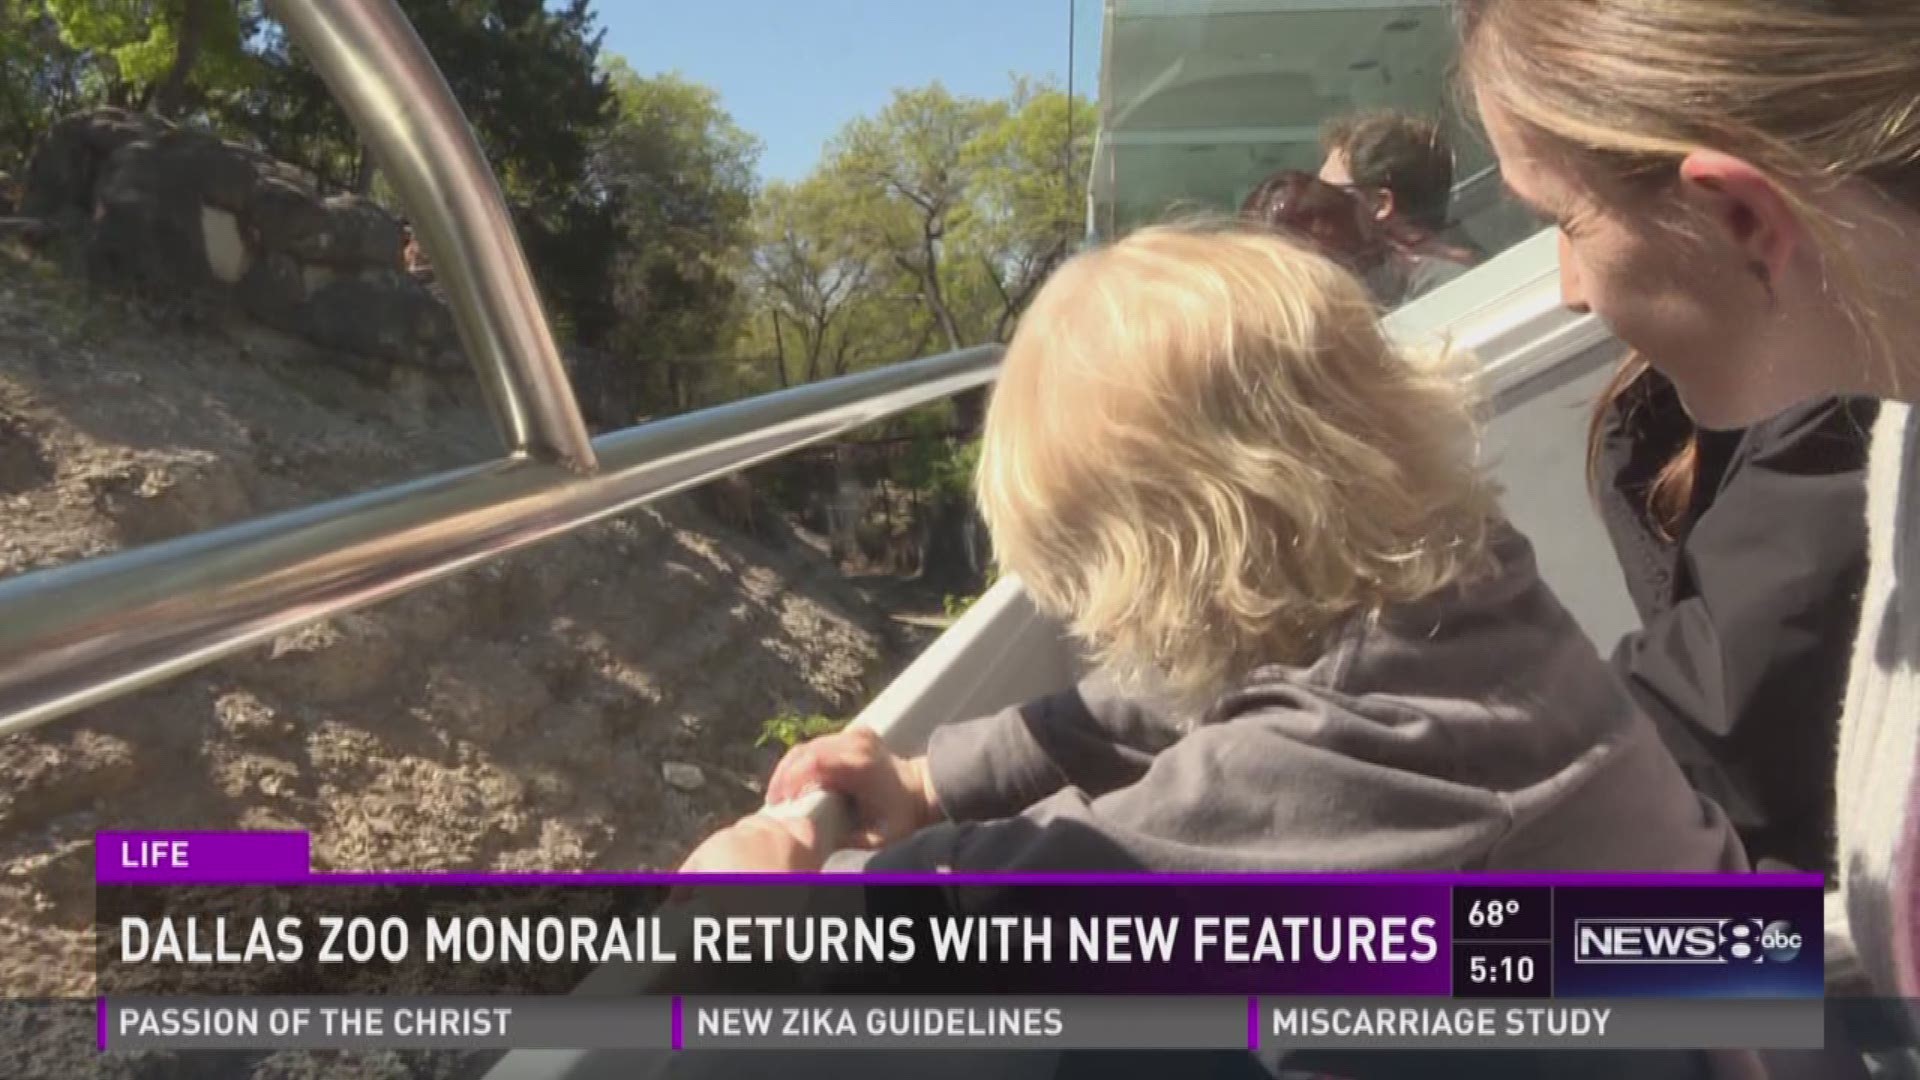 For 25 years, the monorail has been snaking through the Dallas Zoo, taking riders to see exotic animals like chimpanzees, lesser kudu, and bongo antelope. It was closed for much-needed repairs for 18 months, but it reopened on Friday,